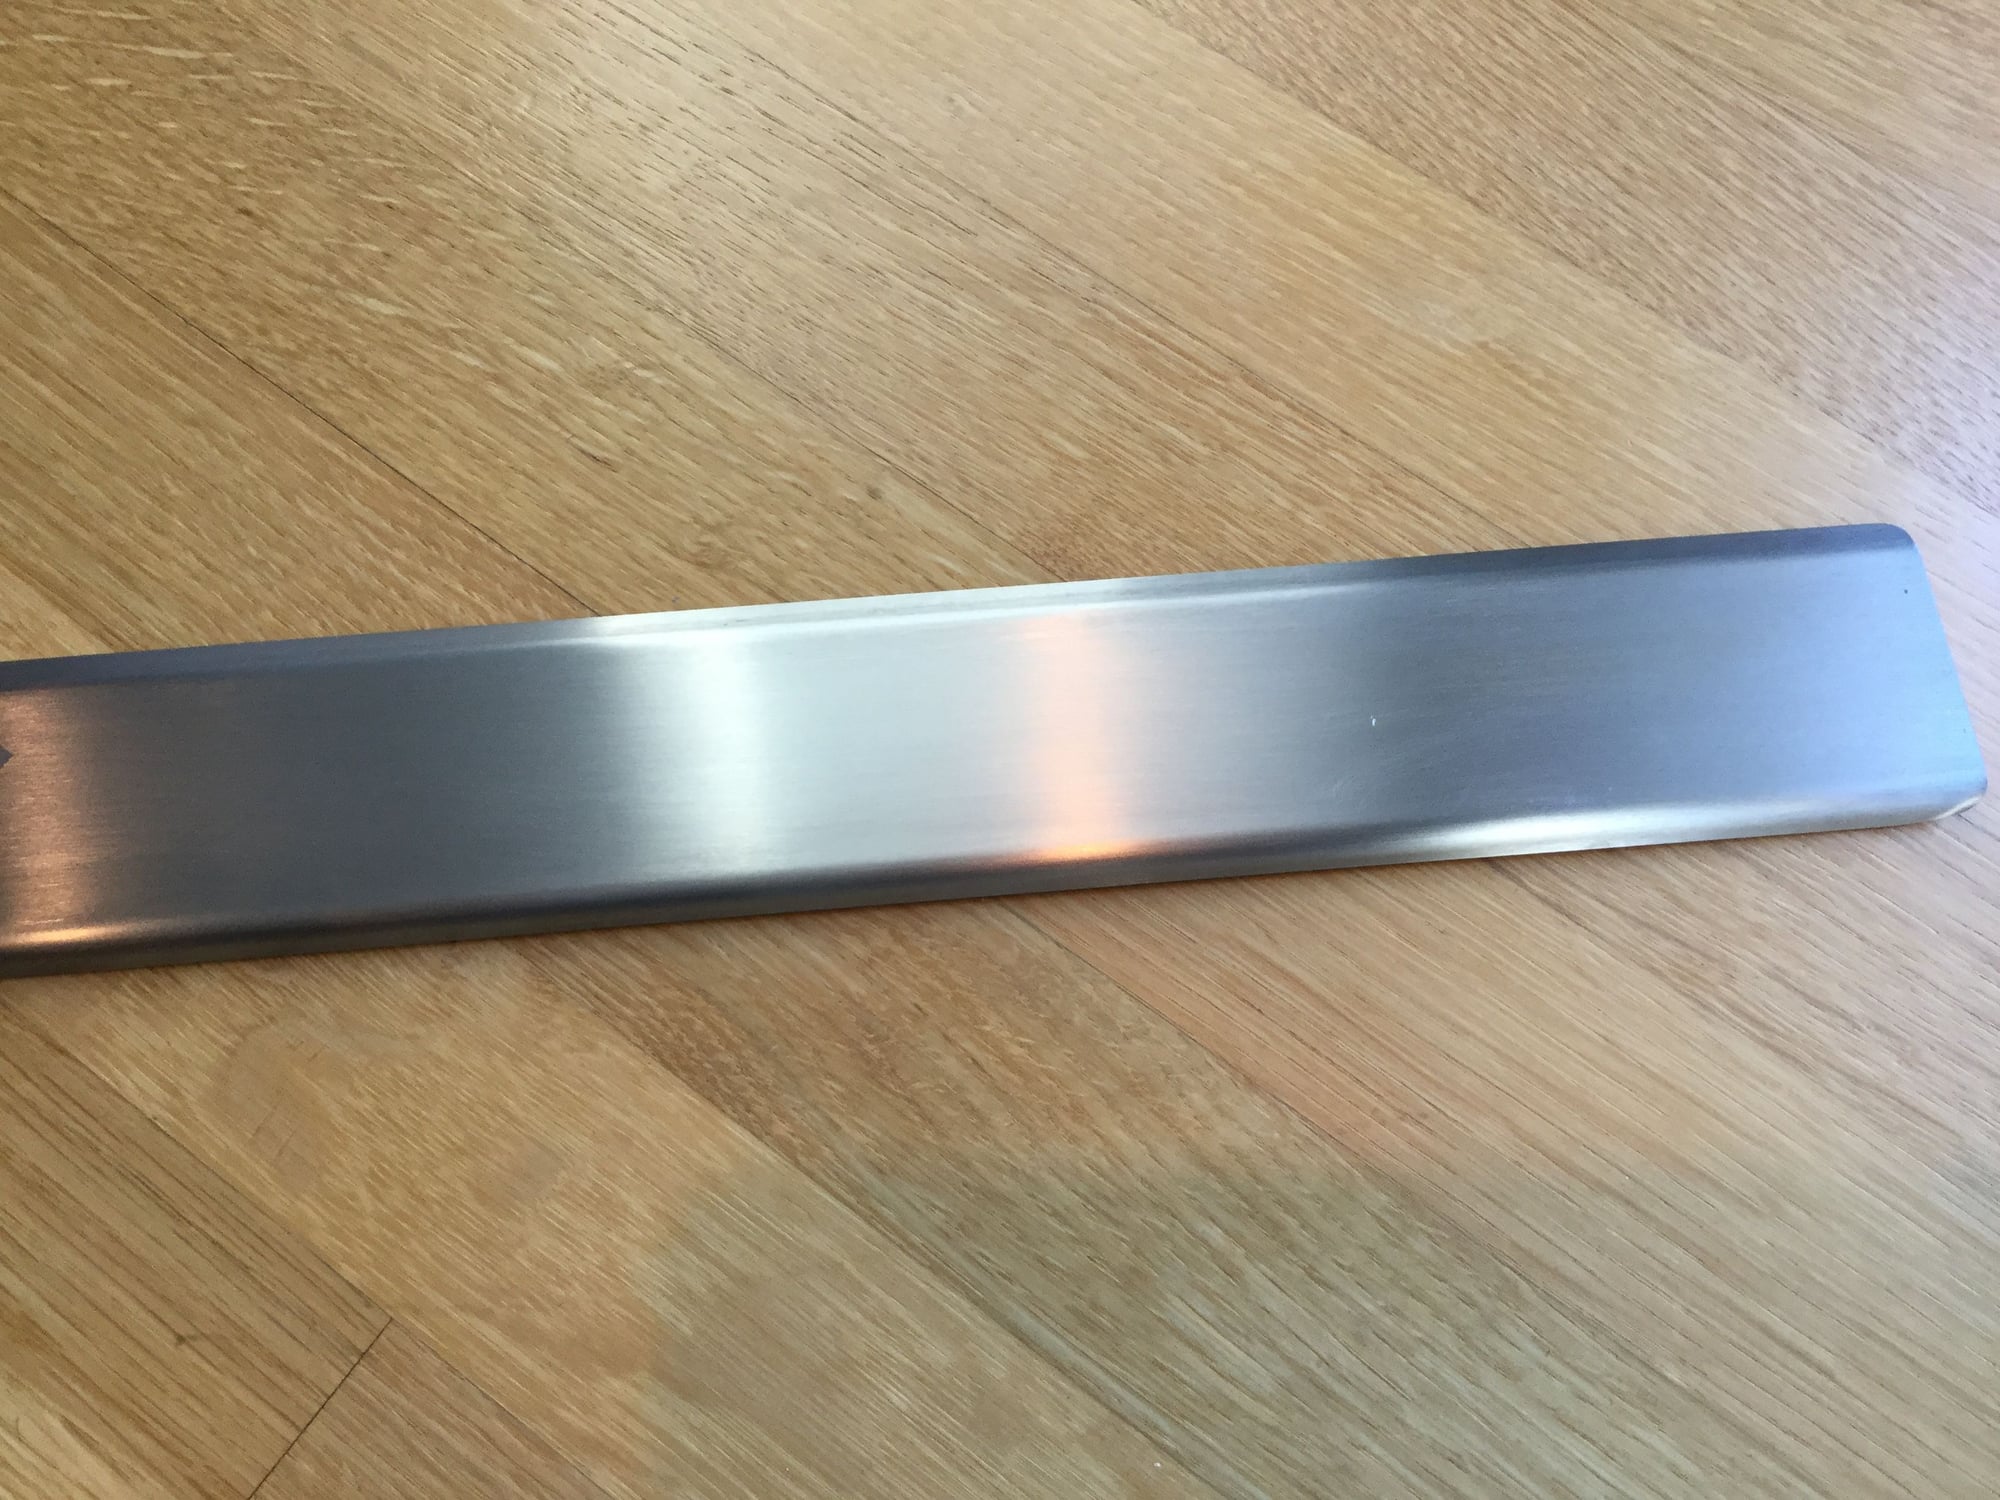 Accessories - CARRERA 4 DOOR SILL FACTORY STAINLESS STEEL DRIVER SIDE - Used - All Years Porsche 911 - Piedmont, CA 94611, United States